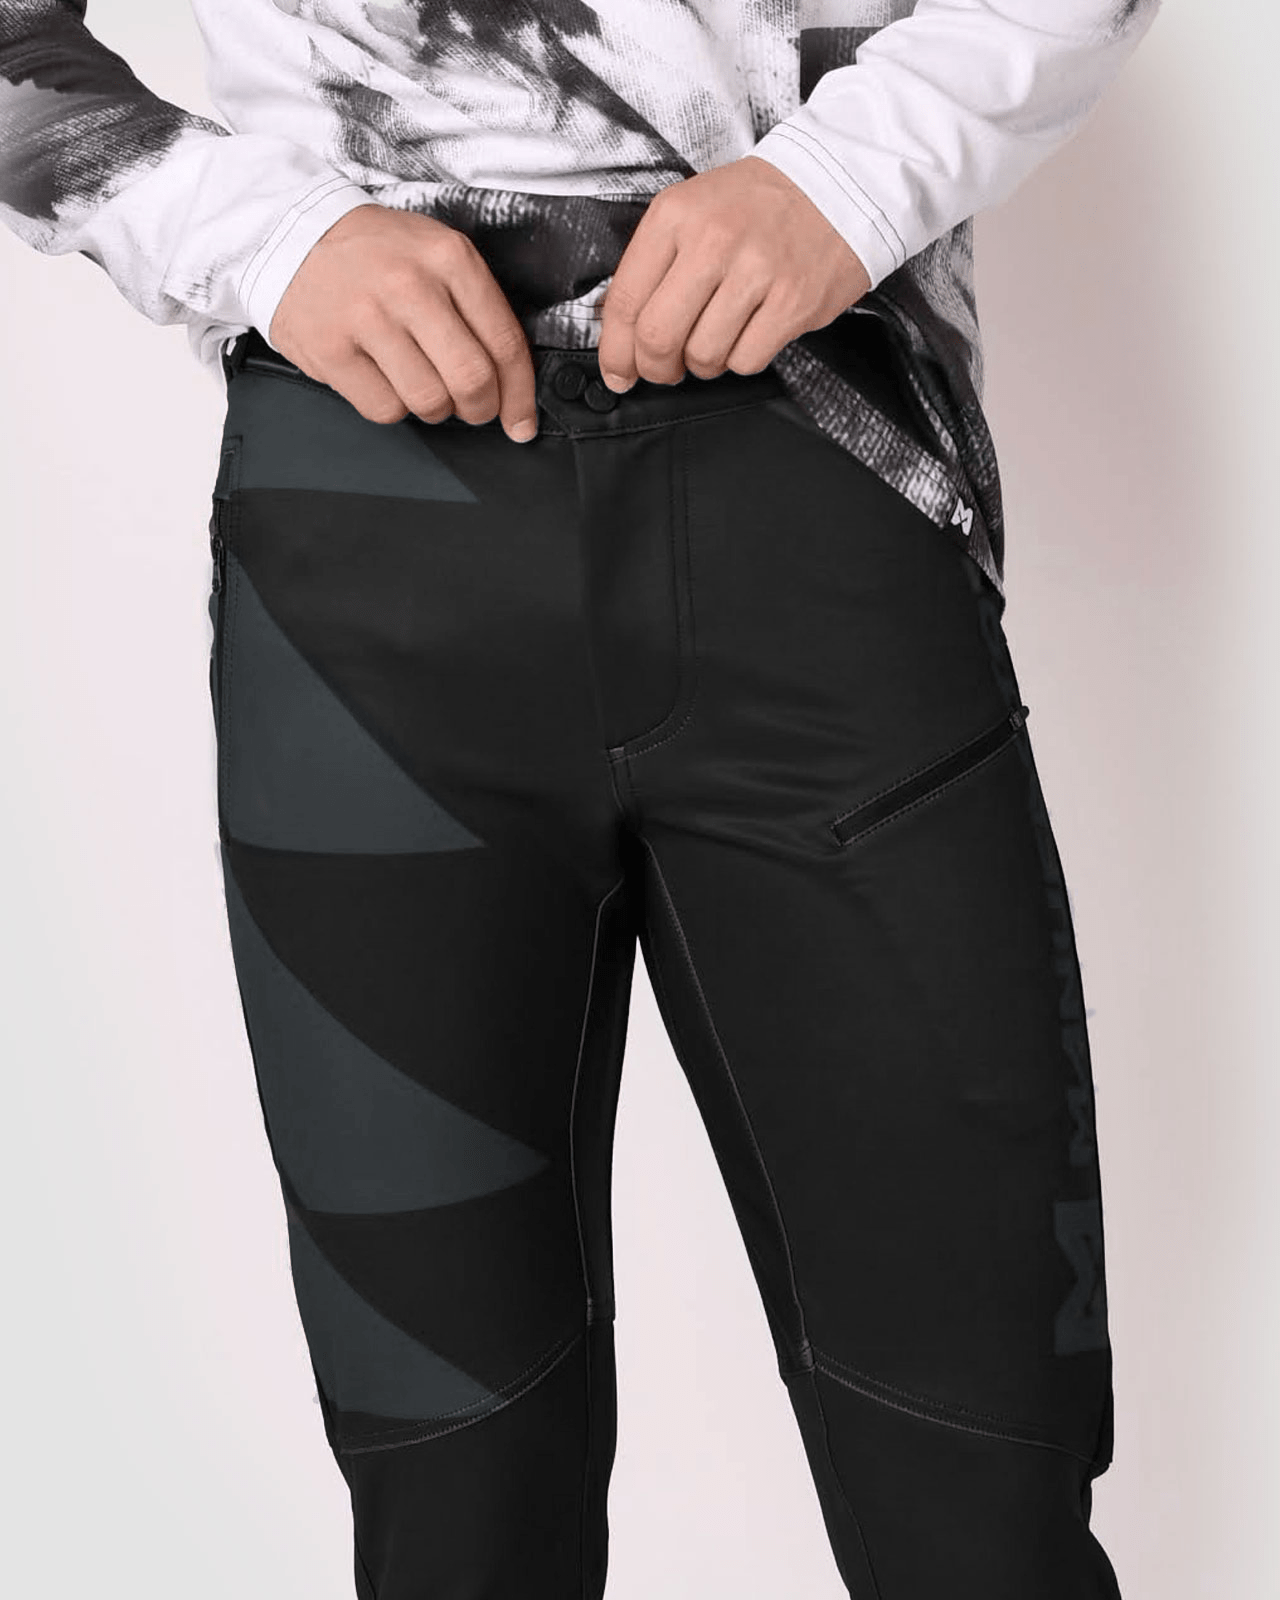 Manufactory Apparel Physical product Charcoal / X-Small Electrix Streamline Pant